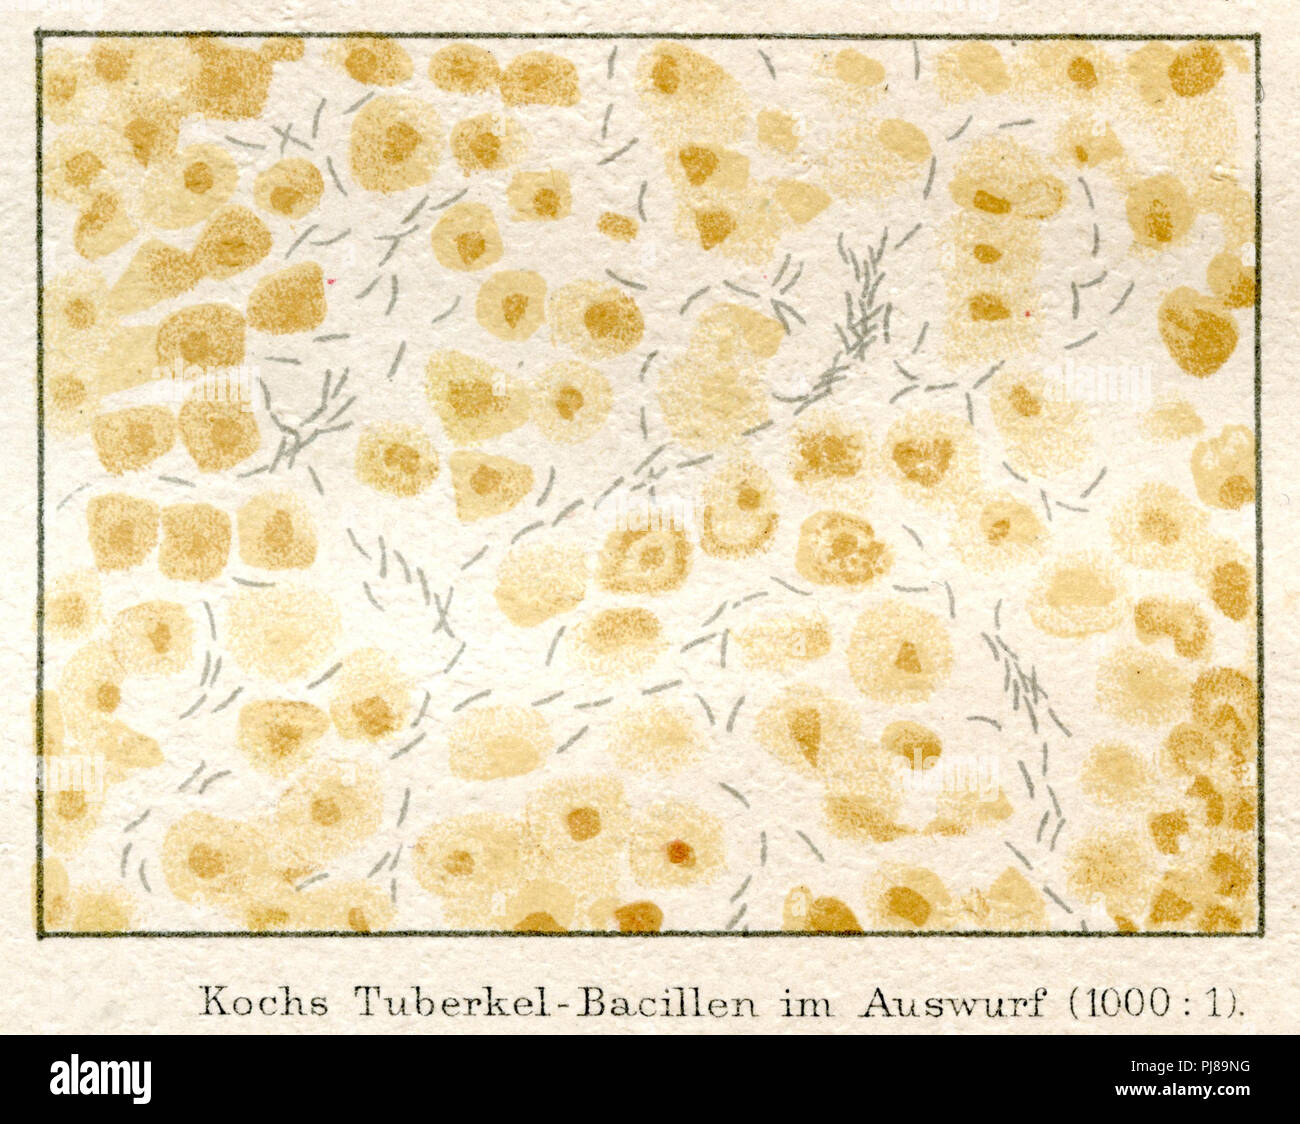 Koch's tubercle bacteria in the sputum of a patient under the microscope (1000: 1).,   1885 Stock Photo